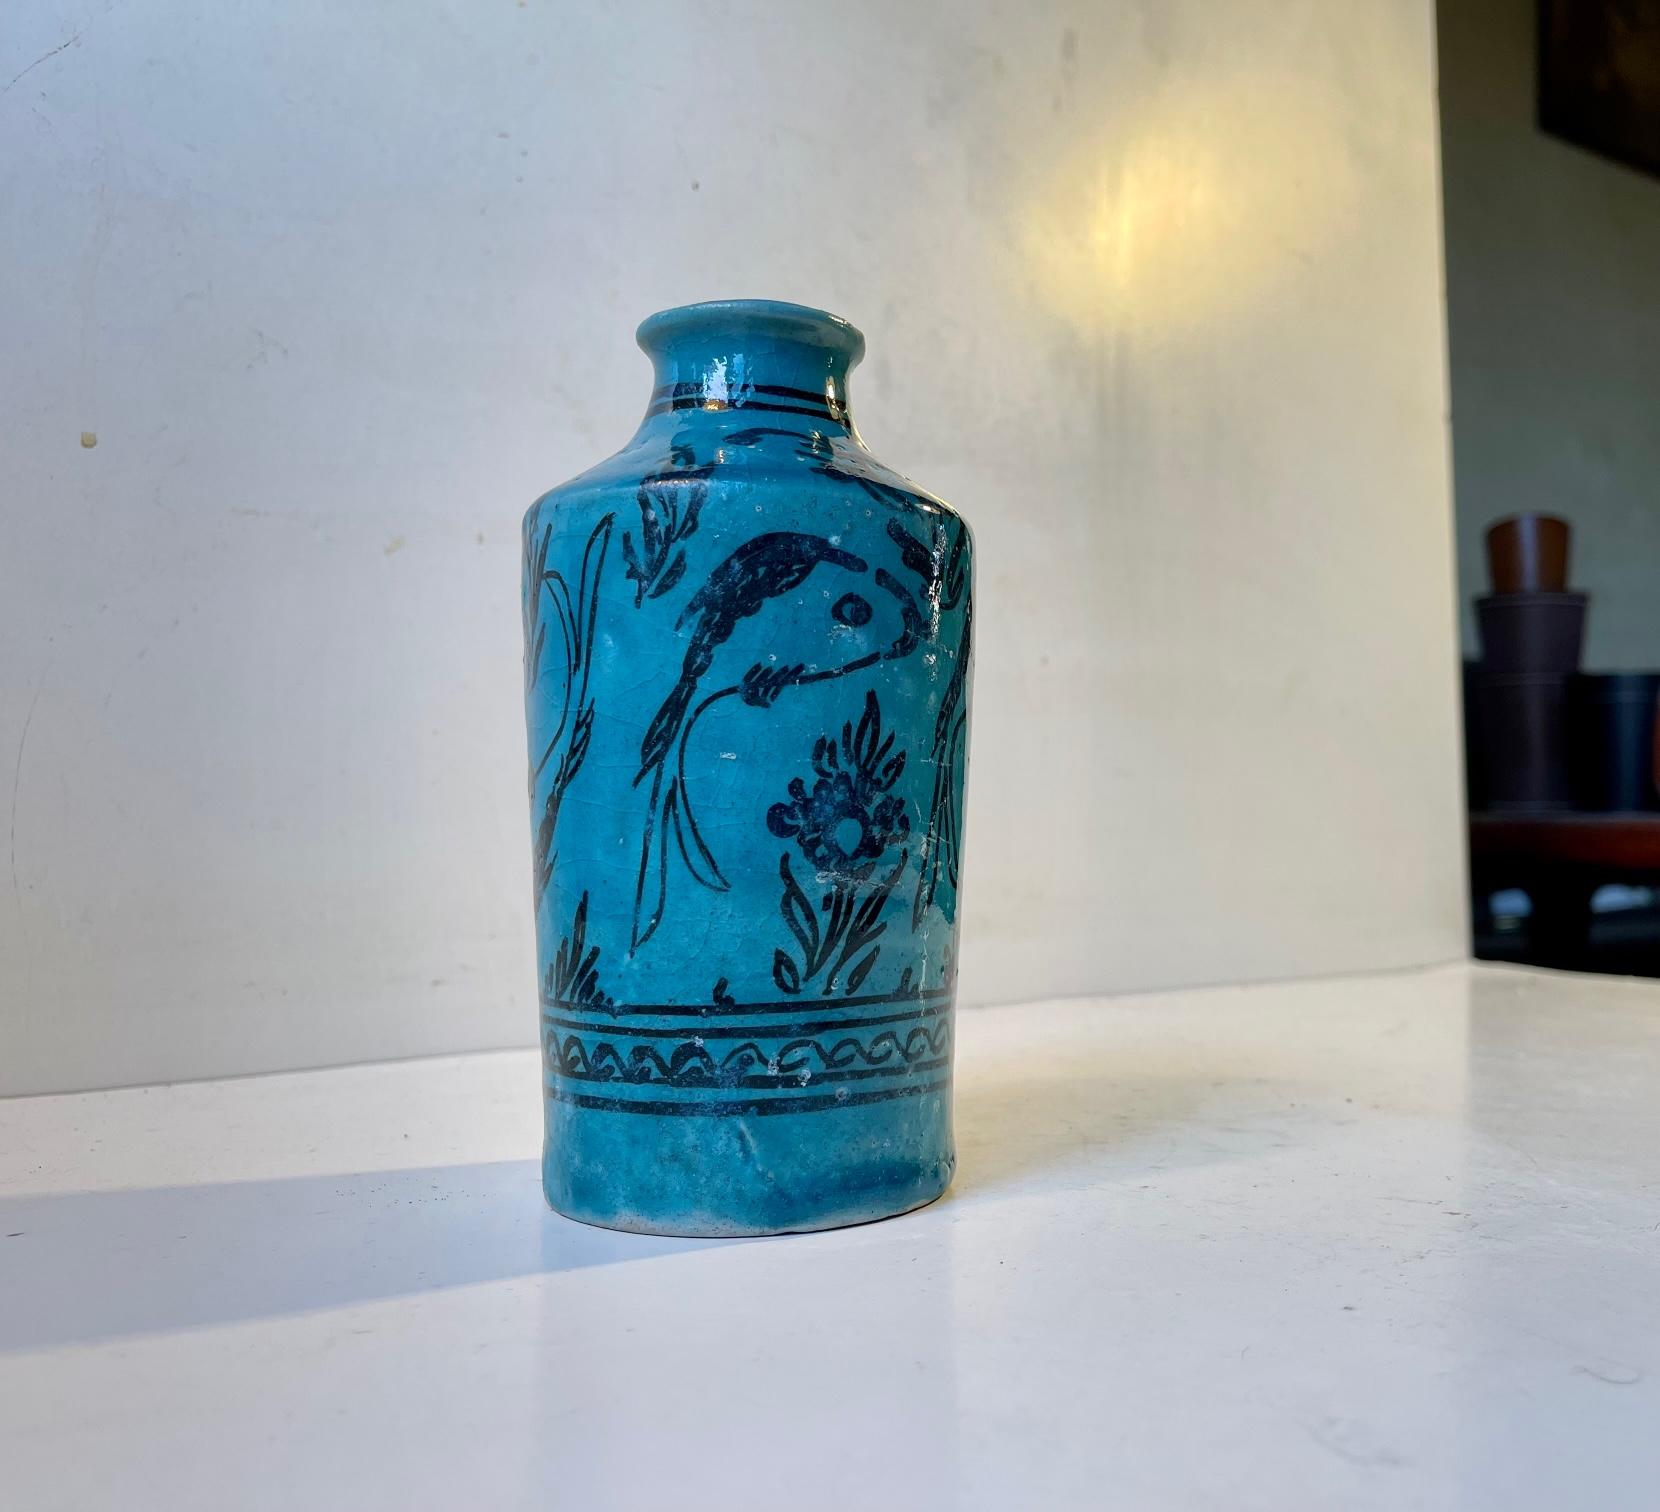 A blue glazed stoneware vase hand-decorated with fishes and flowers. It has no markings but we suspect it might have been made by Italian ceramist Guido Gambone during the 1940s or early 50s. That being said it is sold as in the manner of GG and is